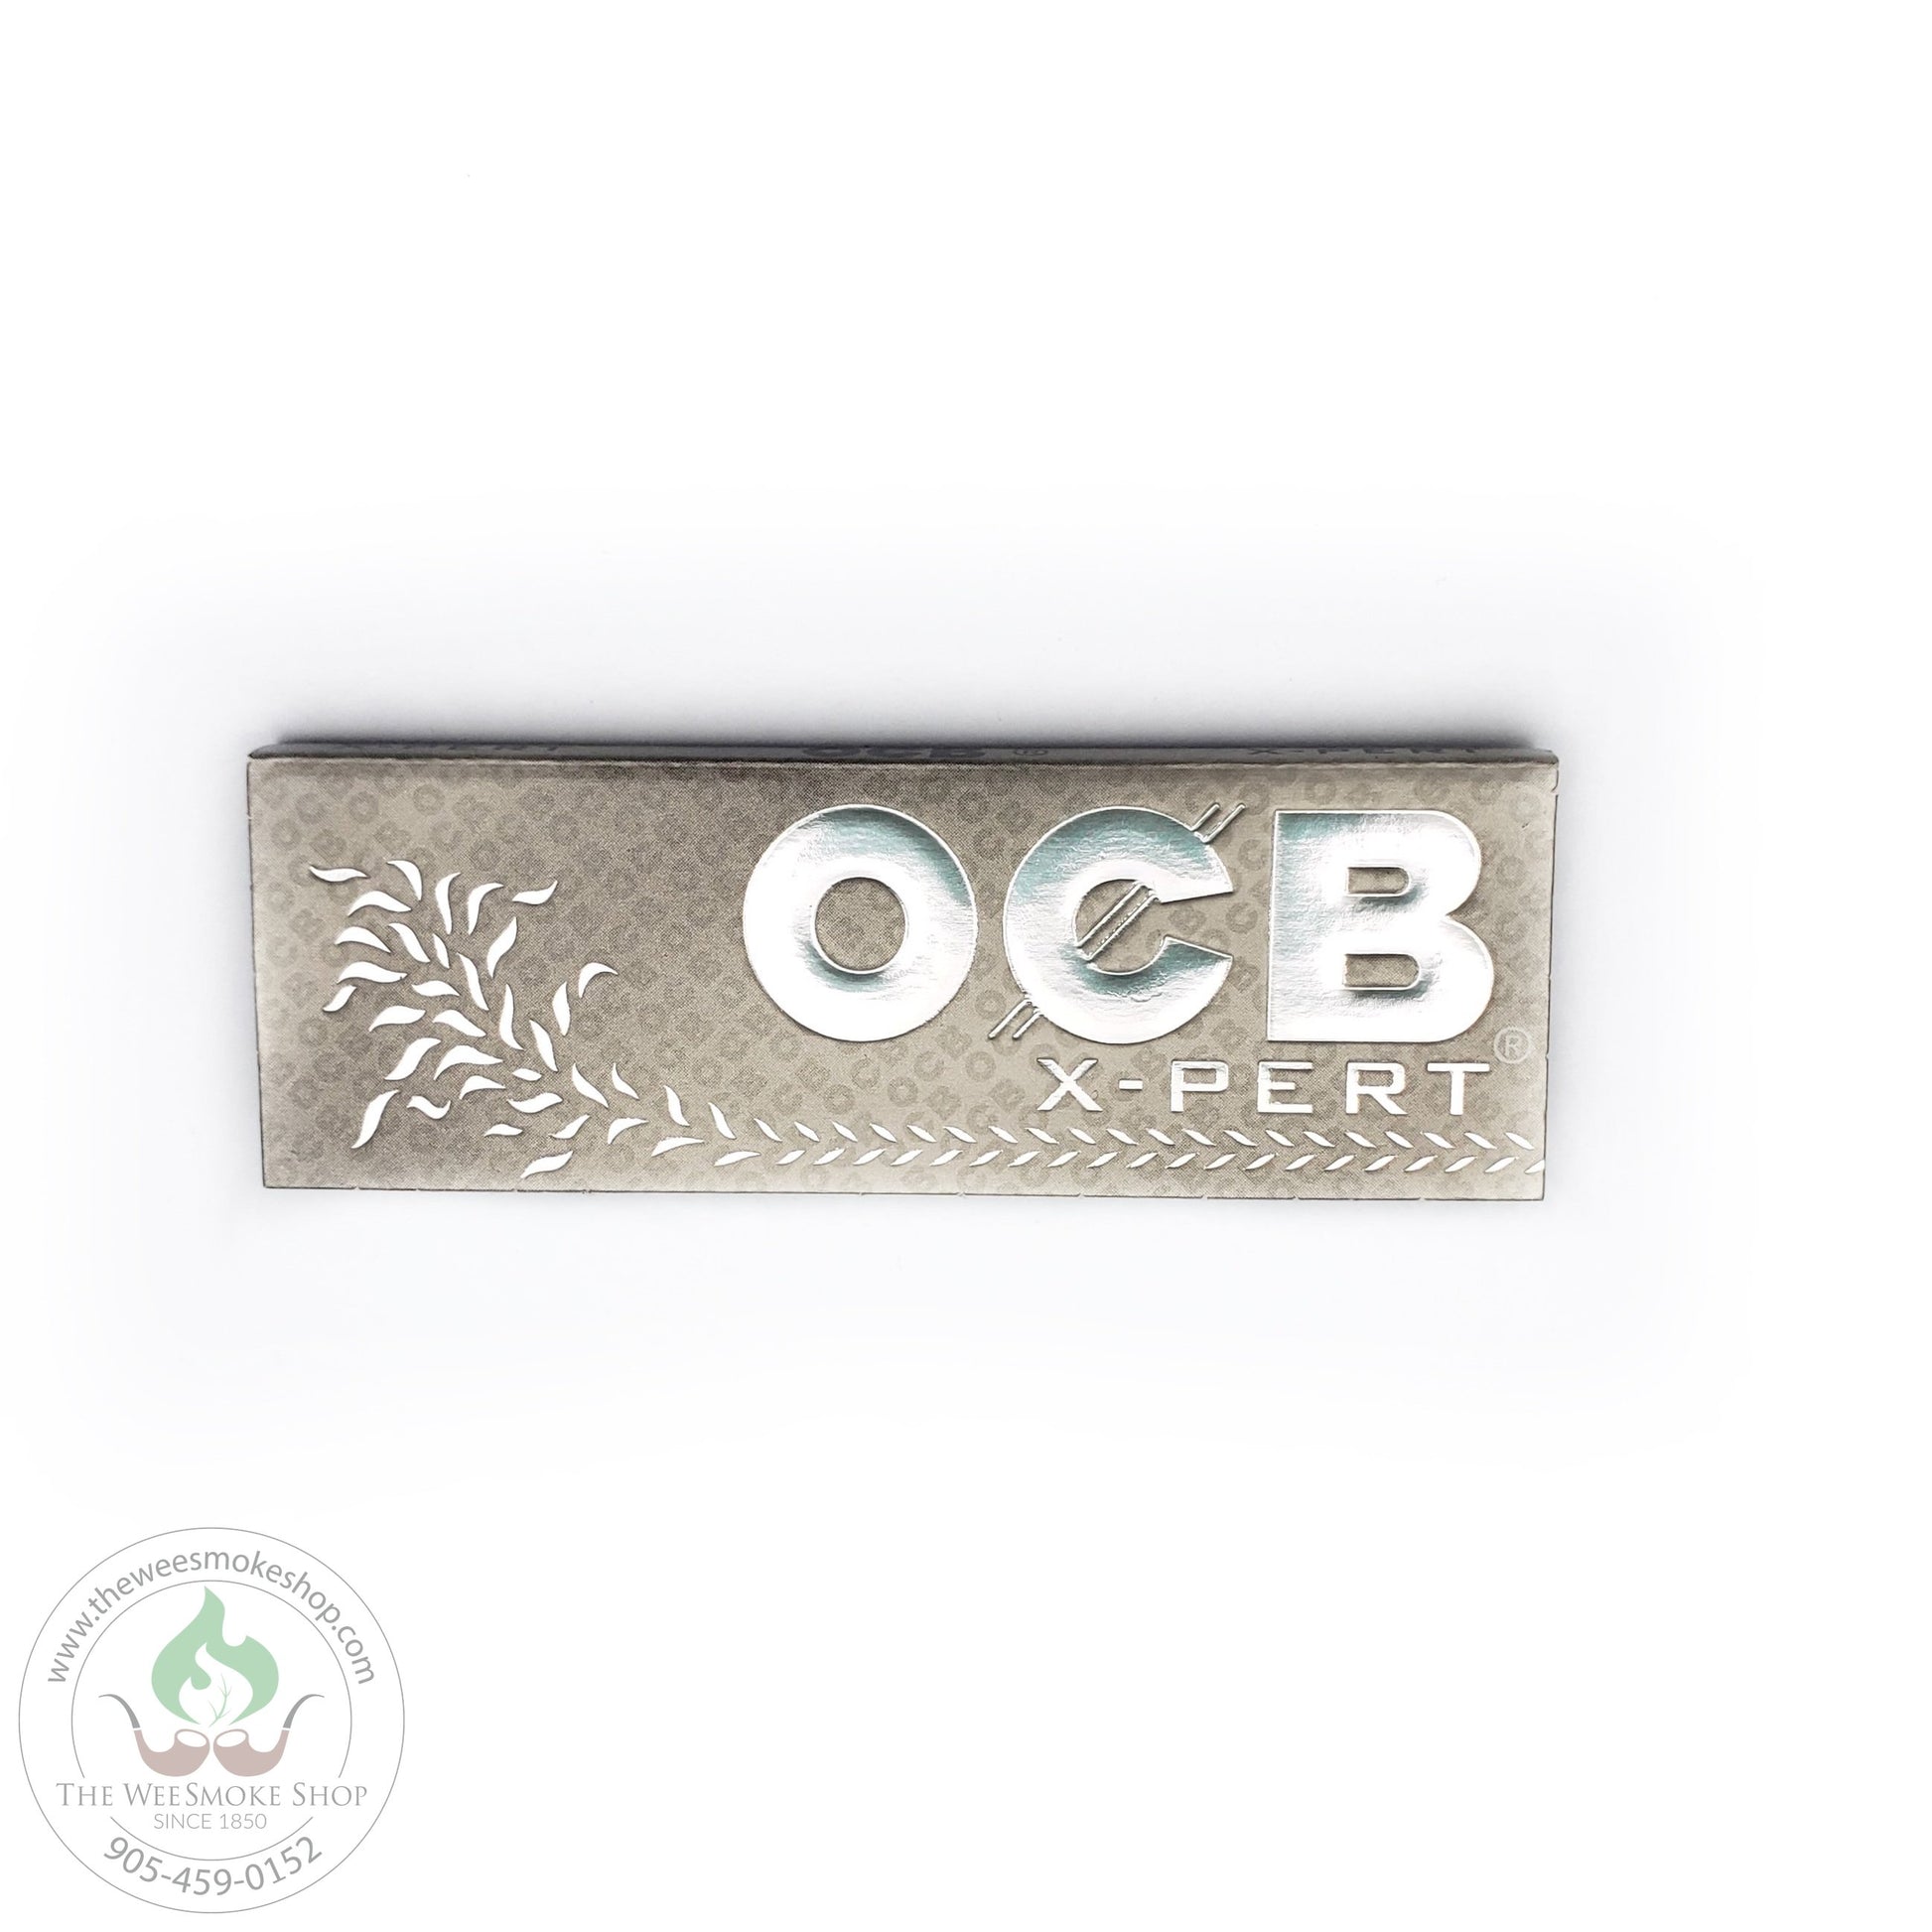 OCB X-Pert Rolling Papers. 1 1/4 size. The Wee Smoke Shop